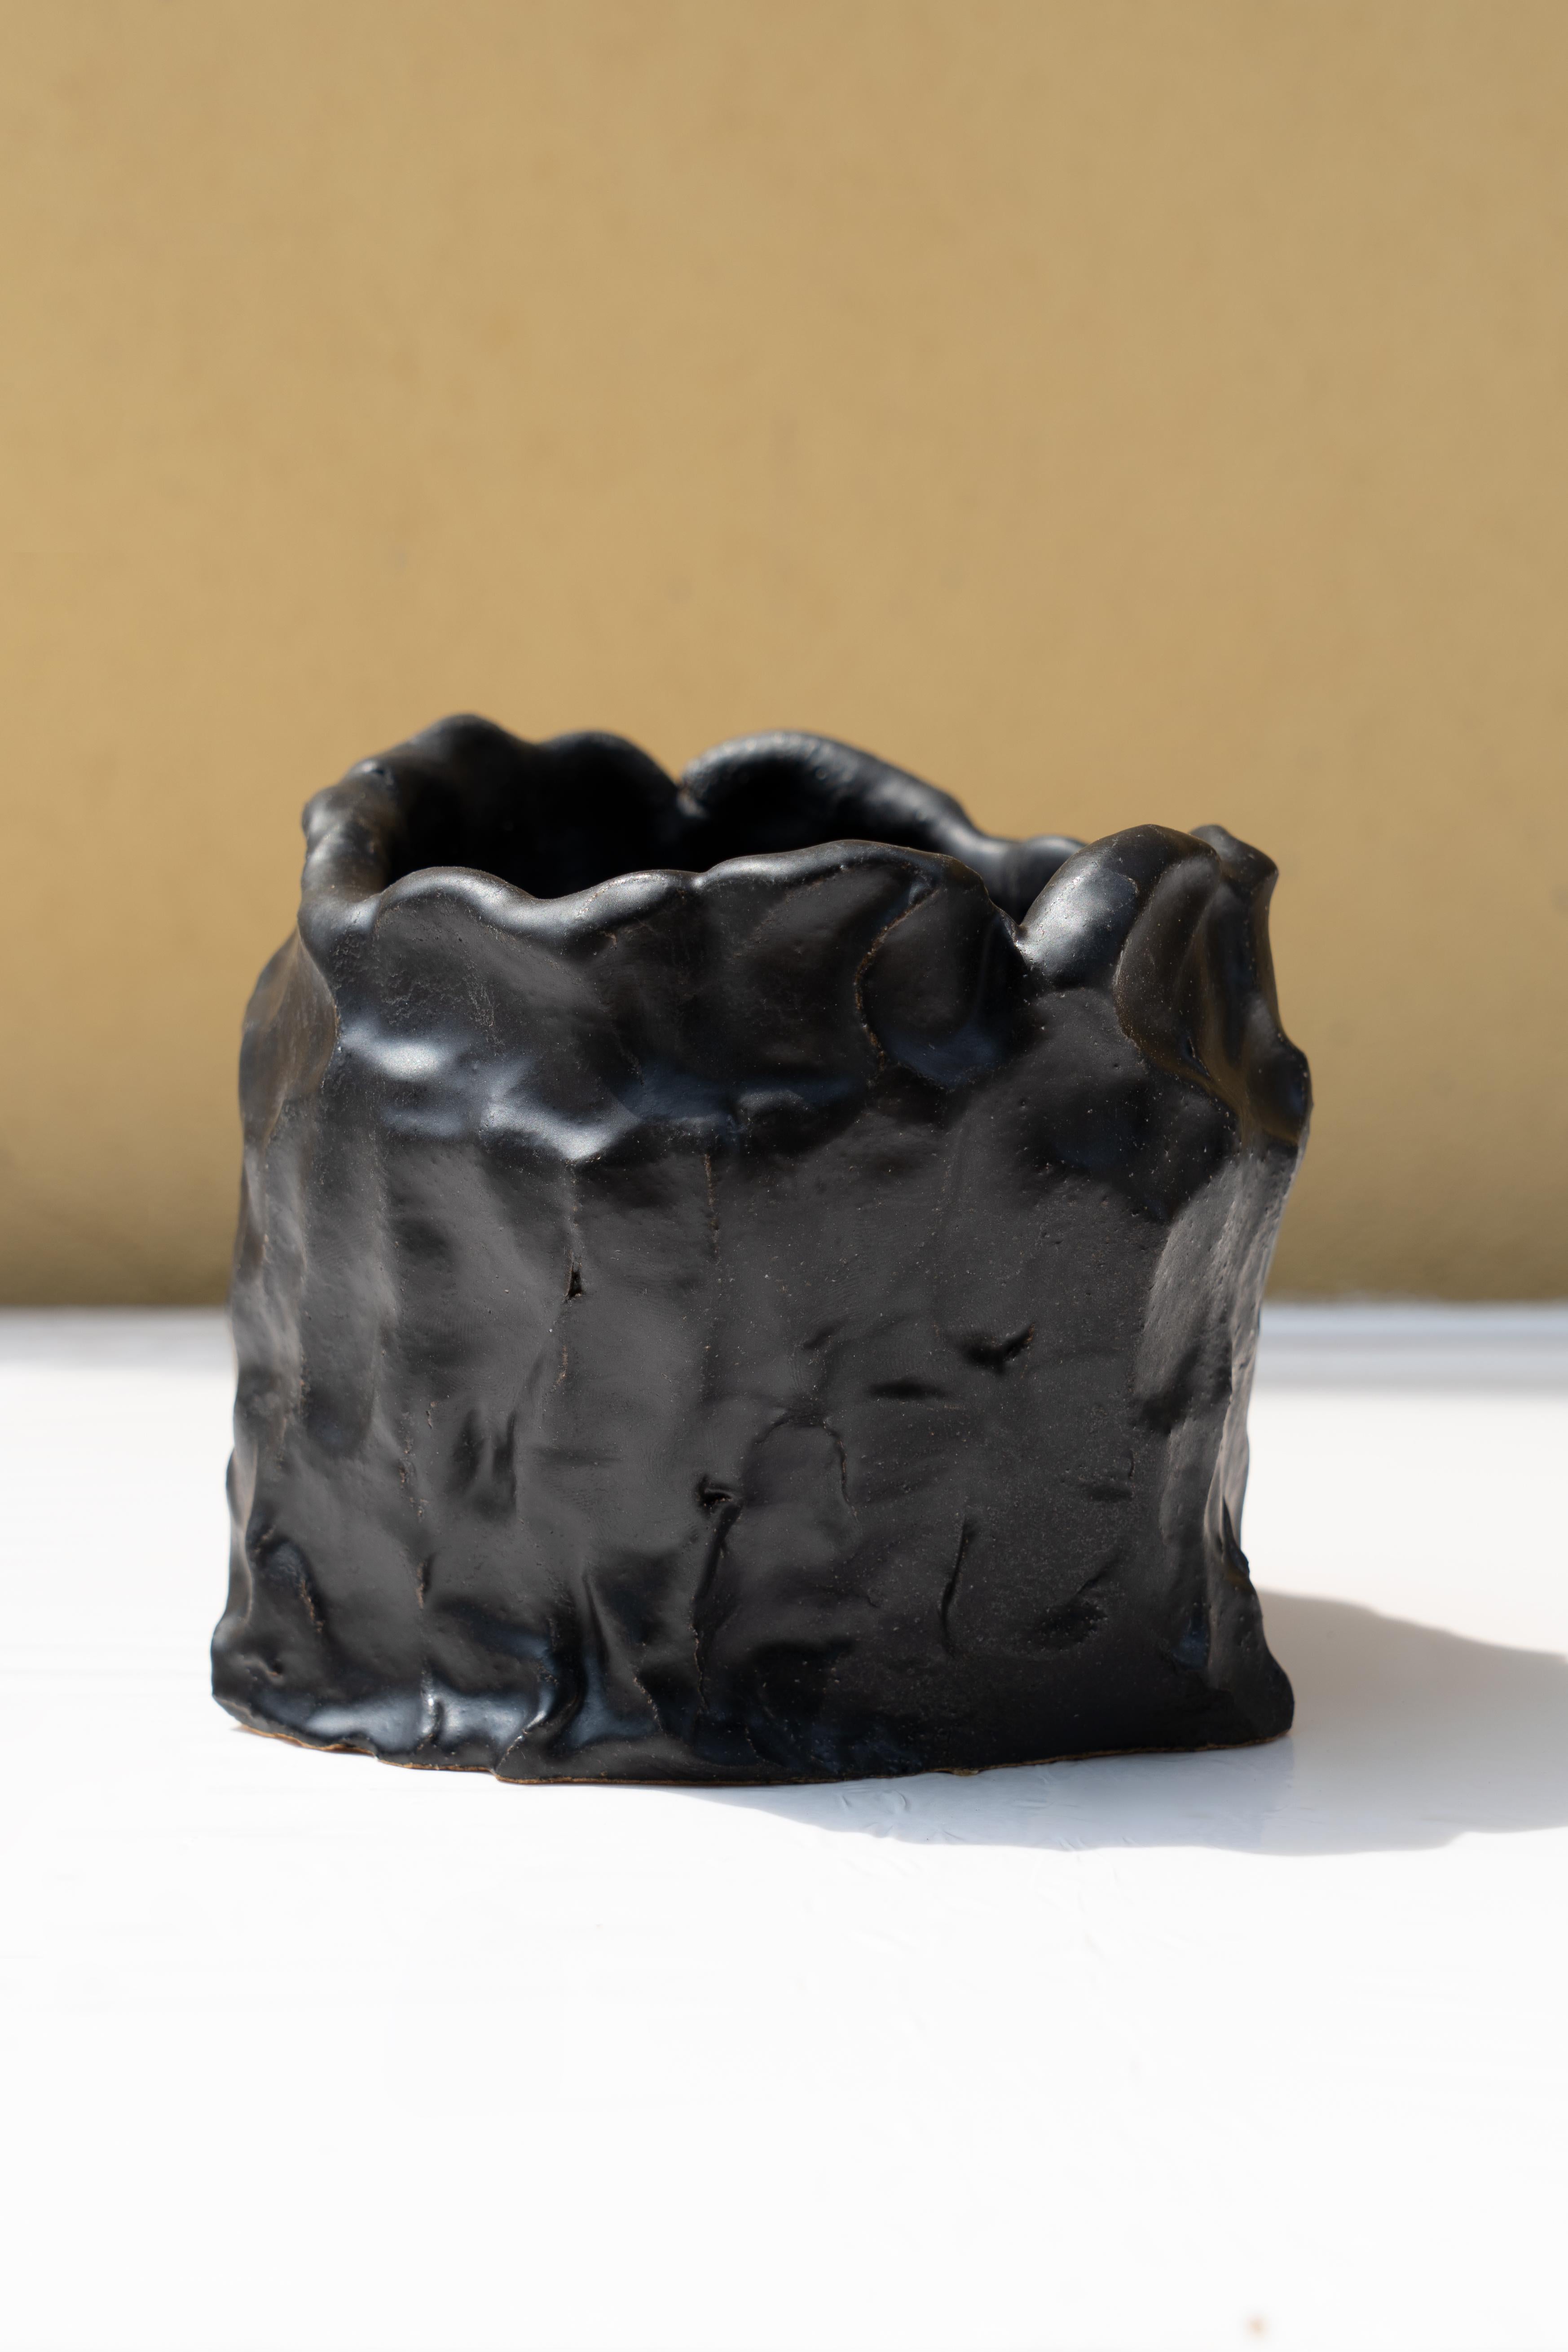 Matte Black vase by Daniele Giannetti
Dimensions: Ø 17 x H 15 cm.
Materials: Glazed terracotta. 

All pieces are made in terracotta from Montelupo, only fired once, then colored by Daniele Giannetti with a white acrylic base, and then a mixture